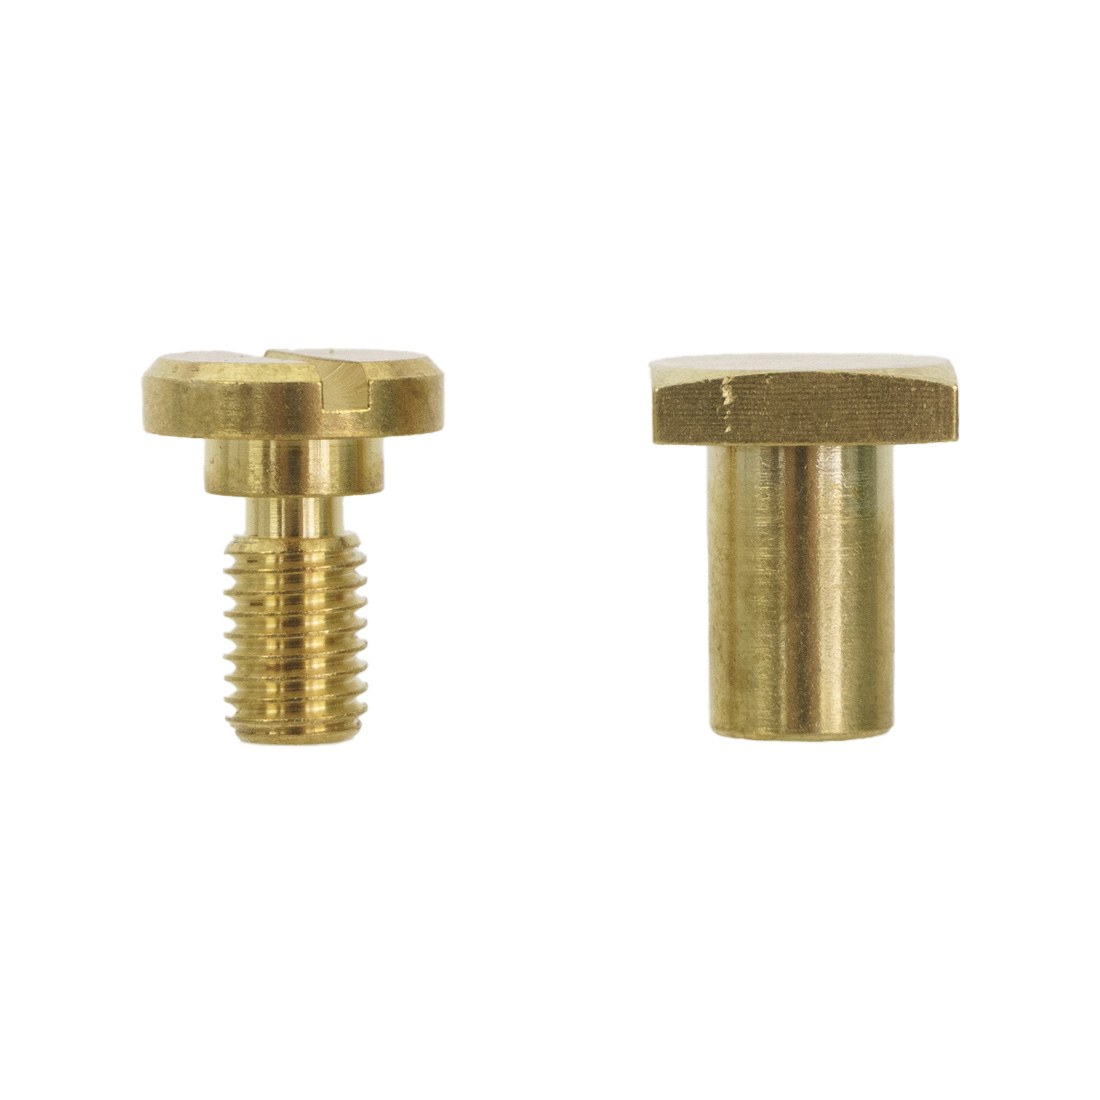 Sörbo Replacement Square Nut and Screw - 1385 Series Seperate View